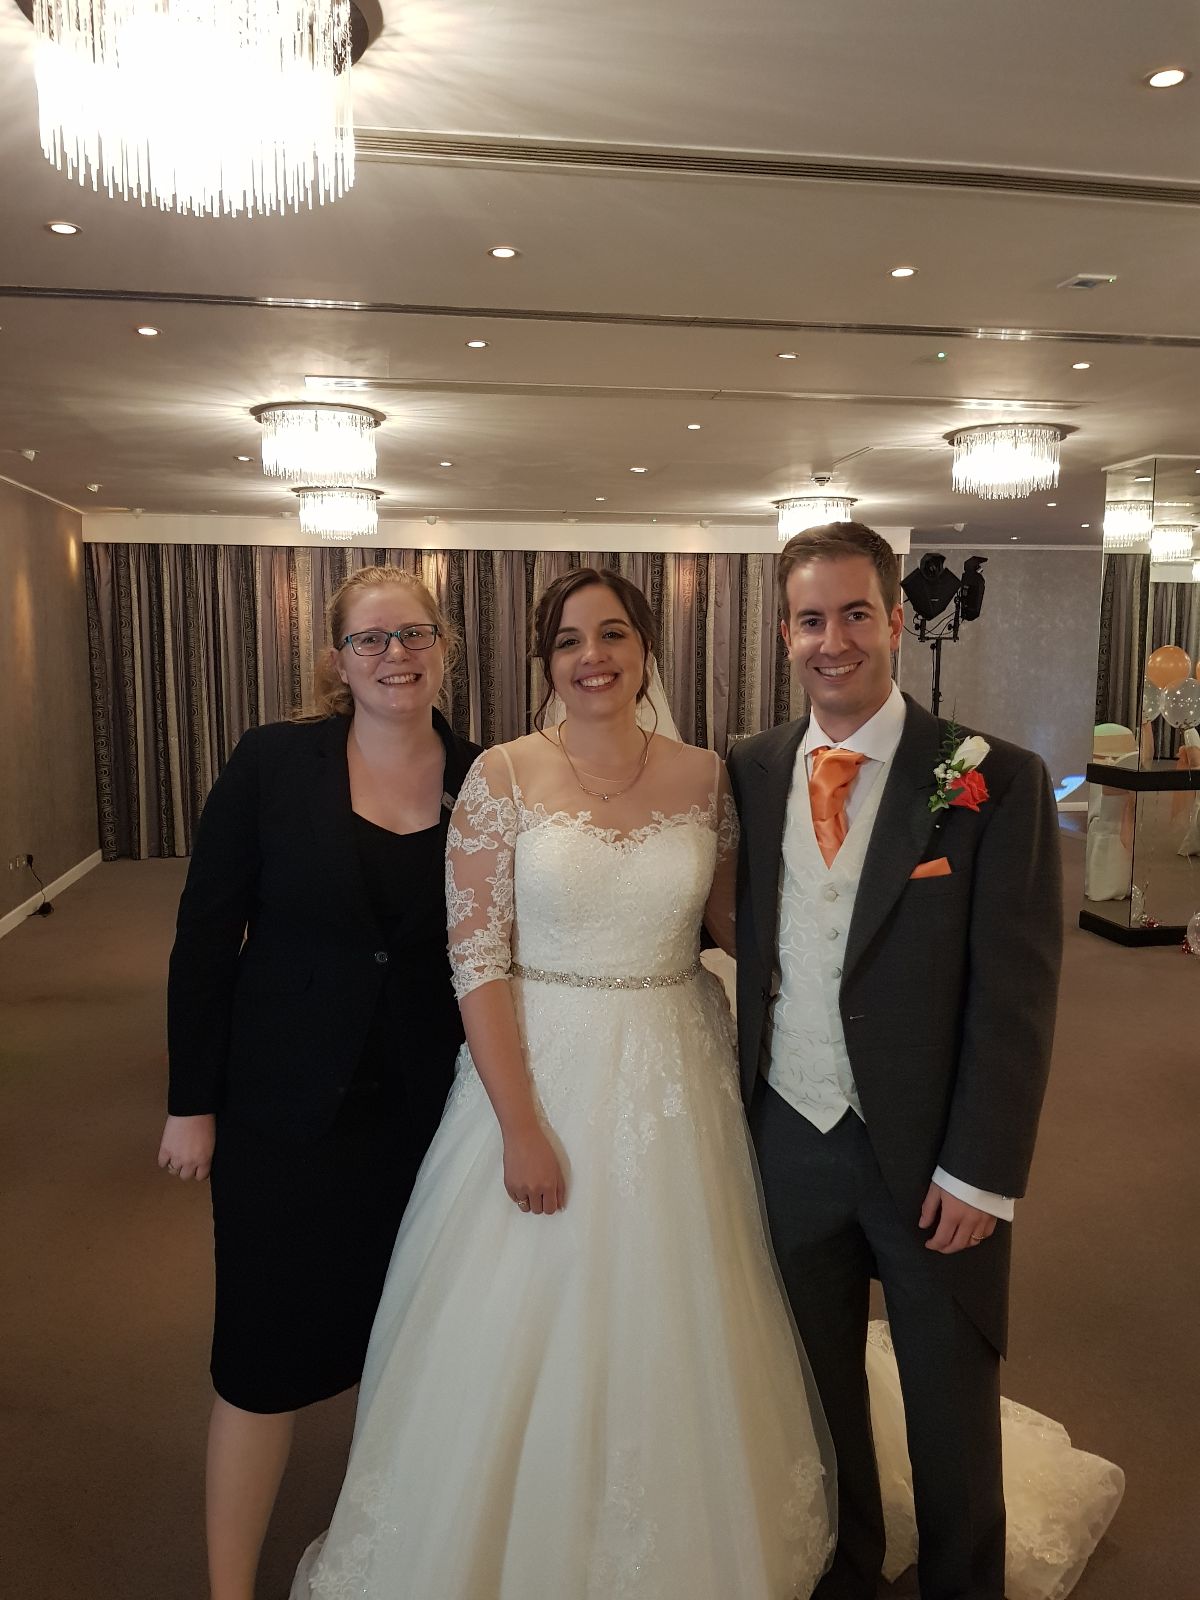 The happy couple with the wedding co-ordinator Sam.